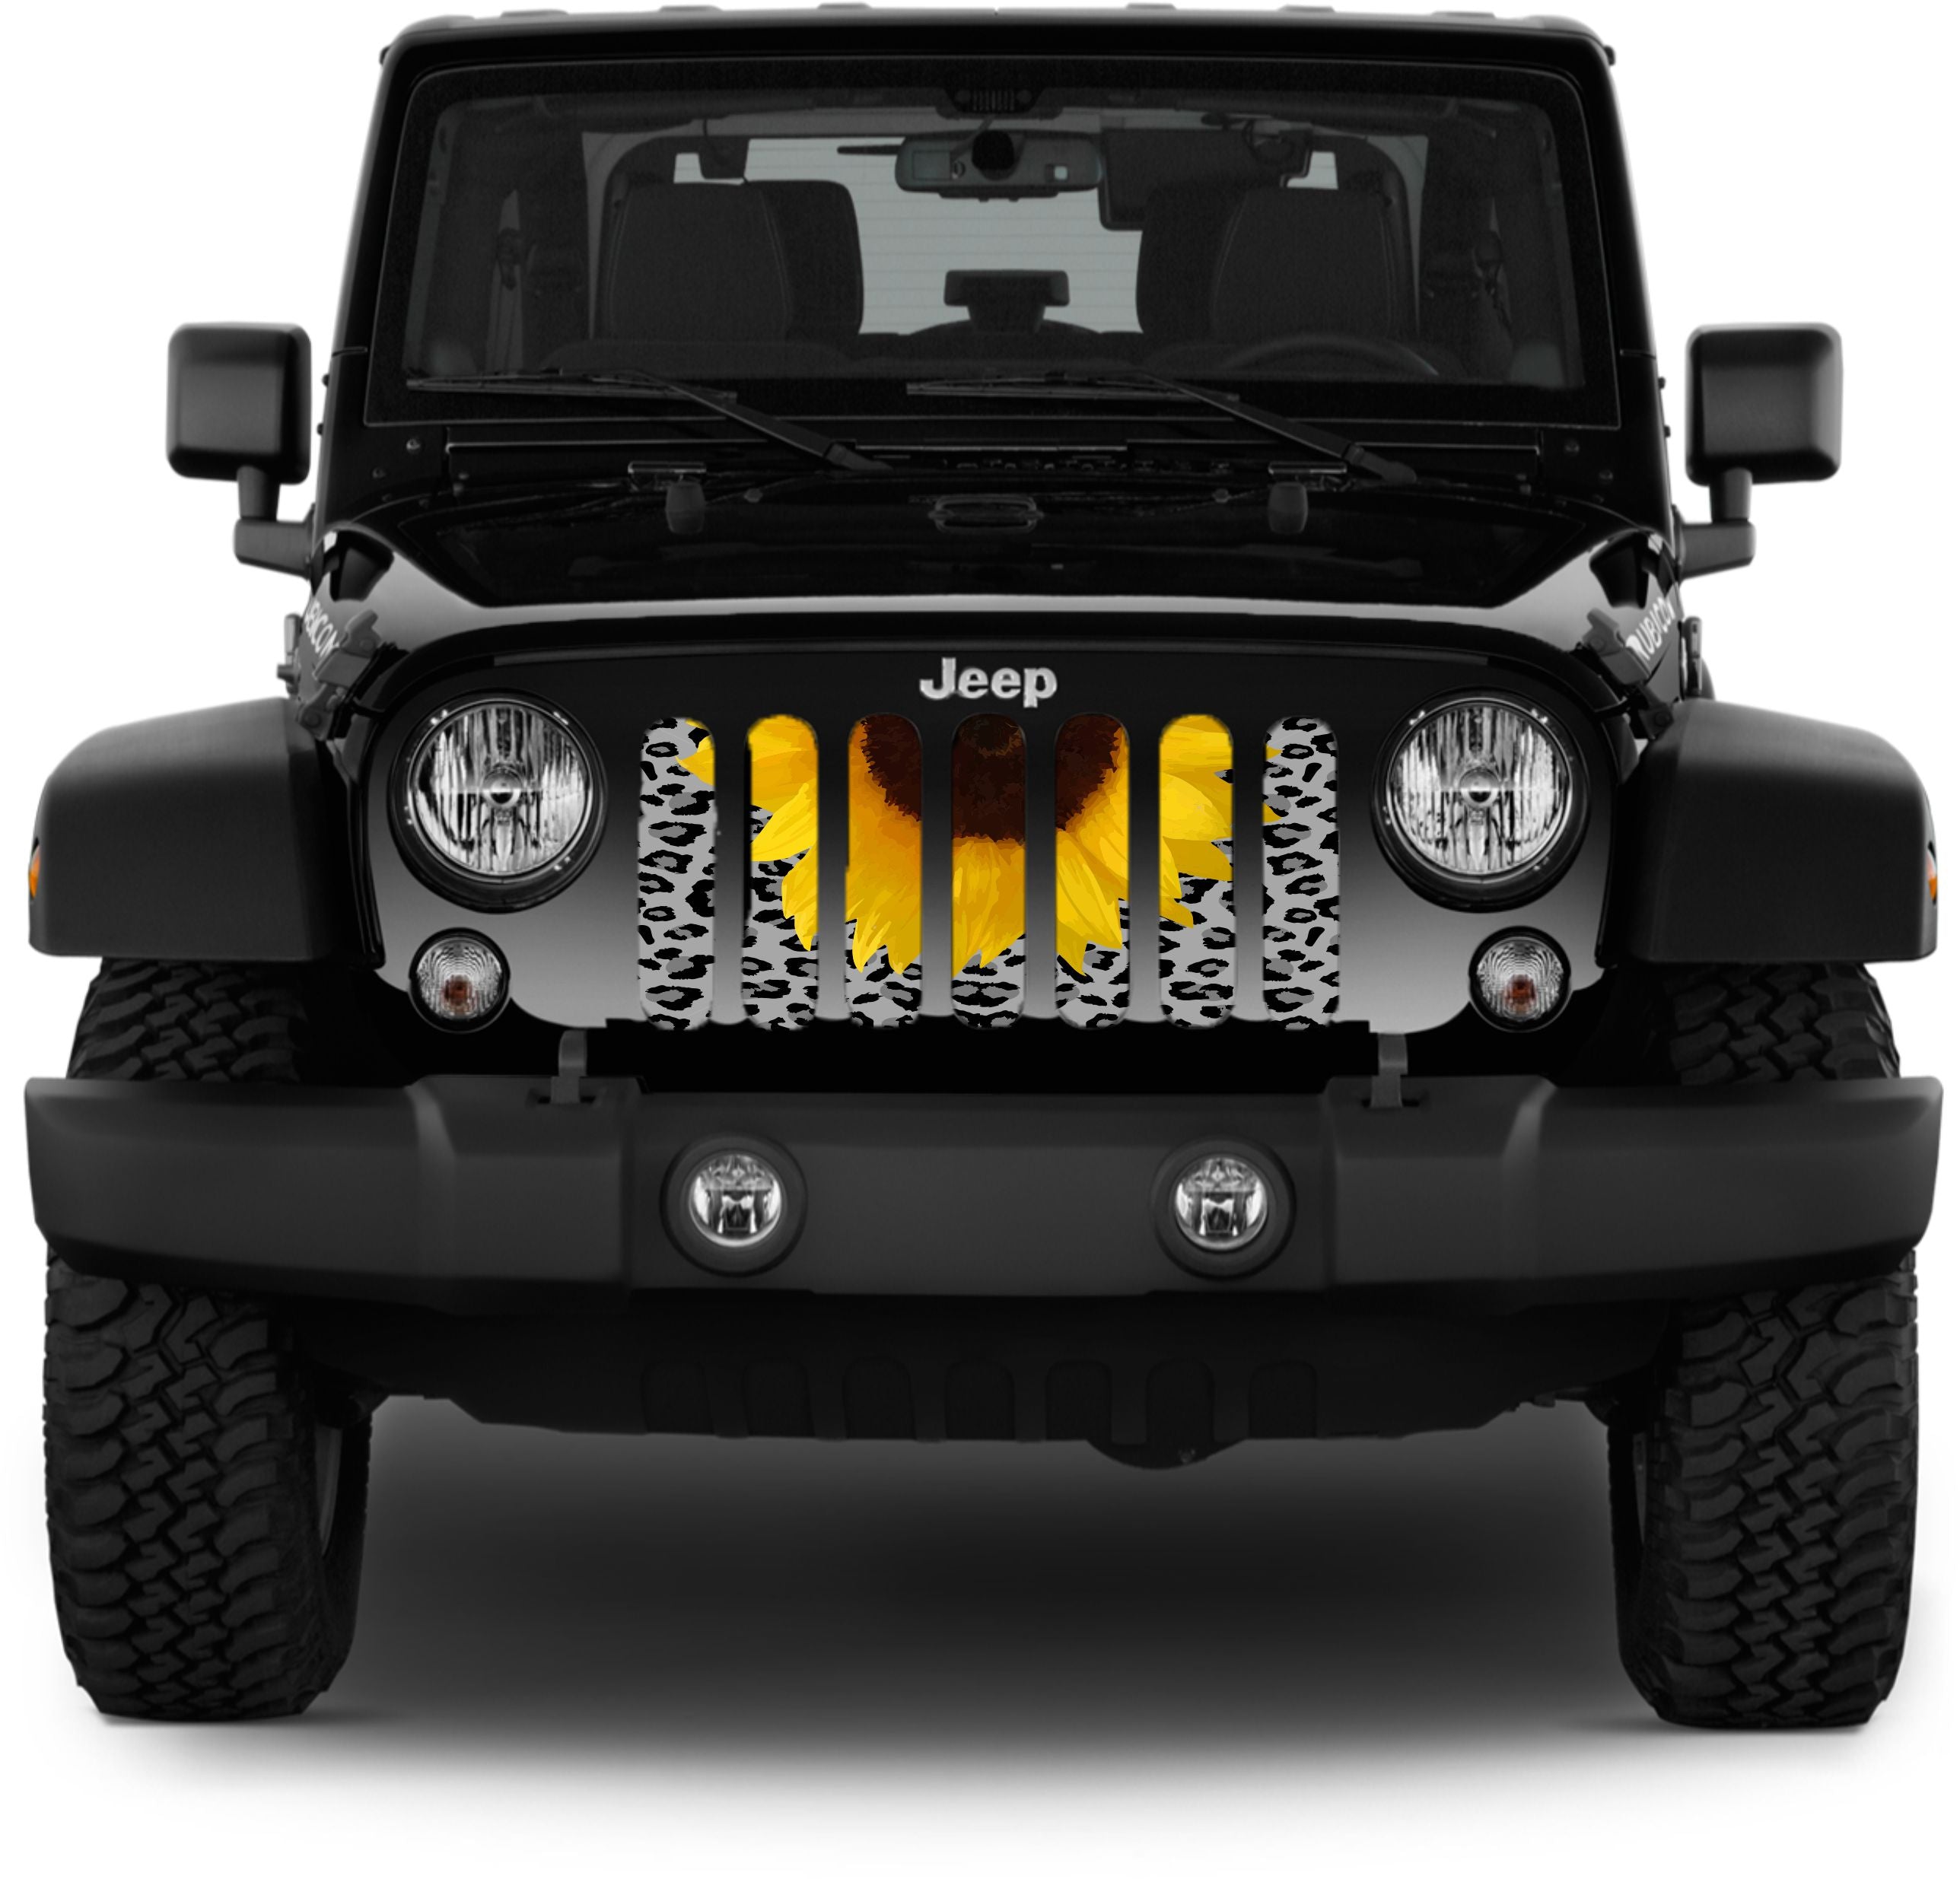 Gray Leopard Cheetah Animal Print with a bright yellow Sunflower Jeep Grille Insert